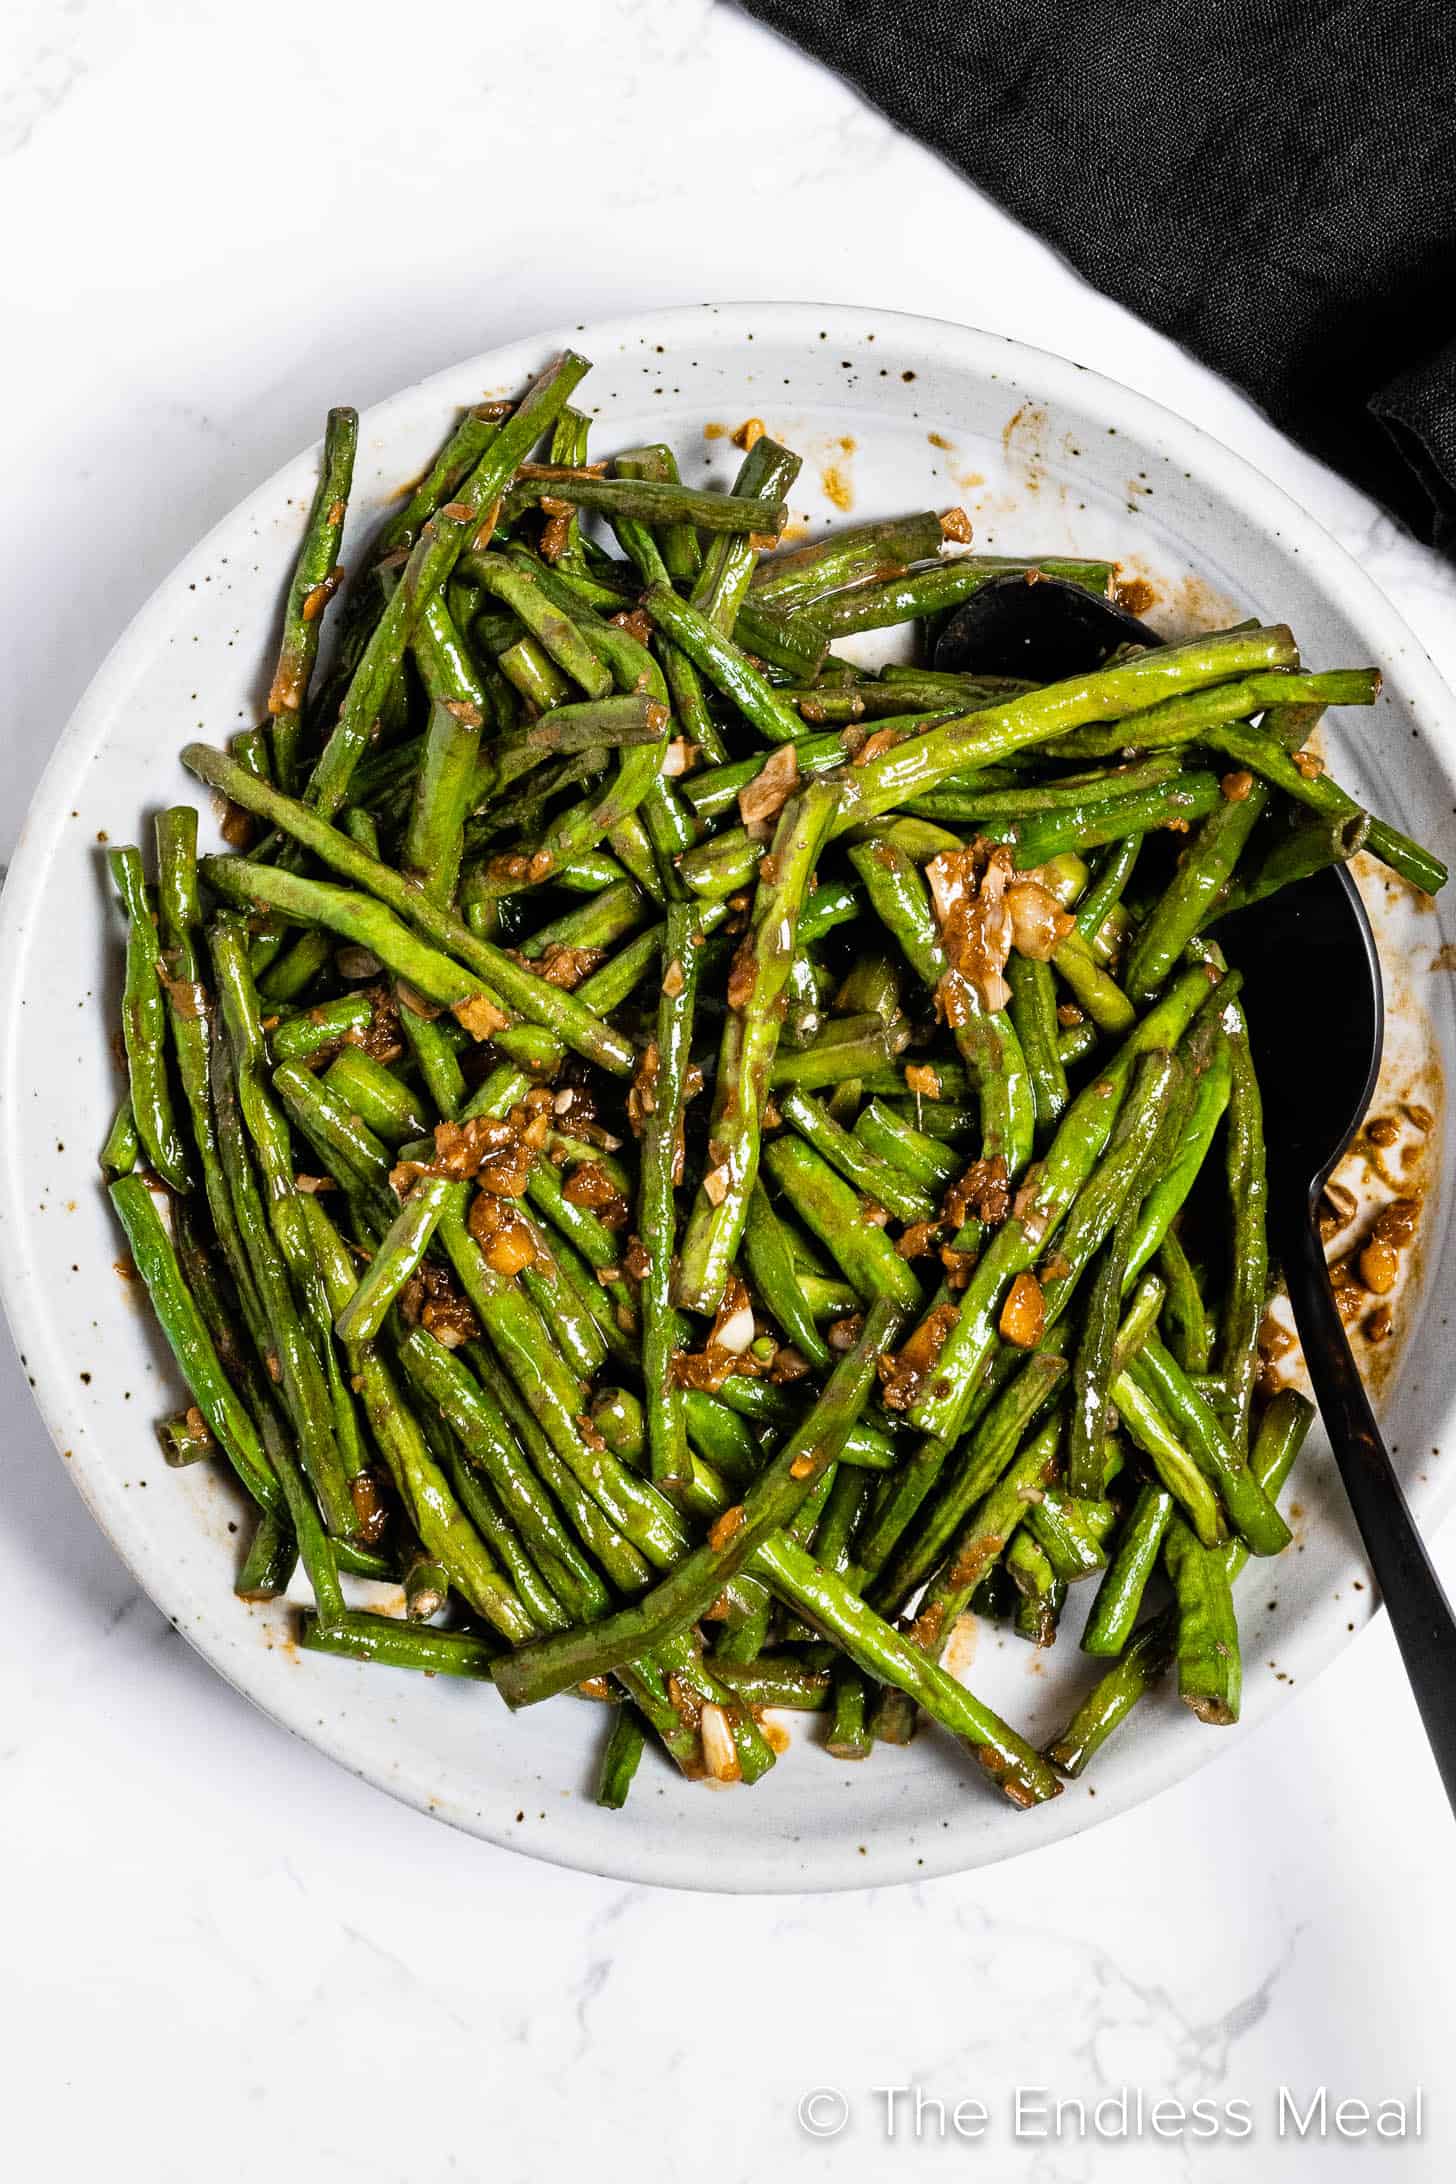 This Long Beans Recipe on a plate